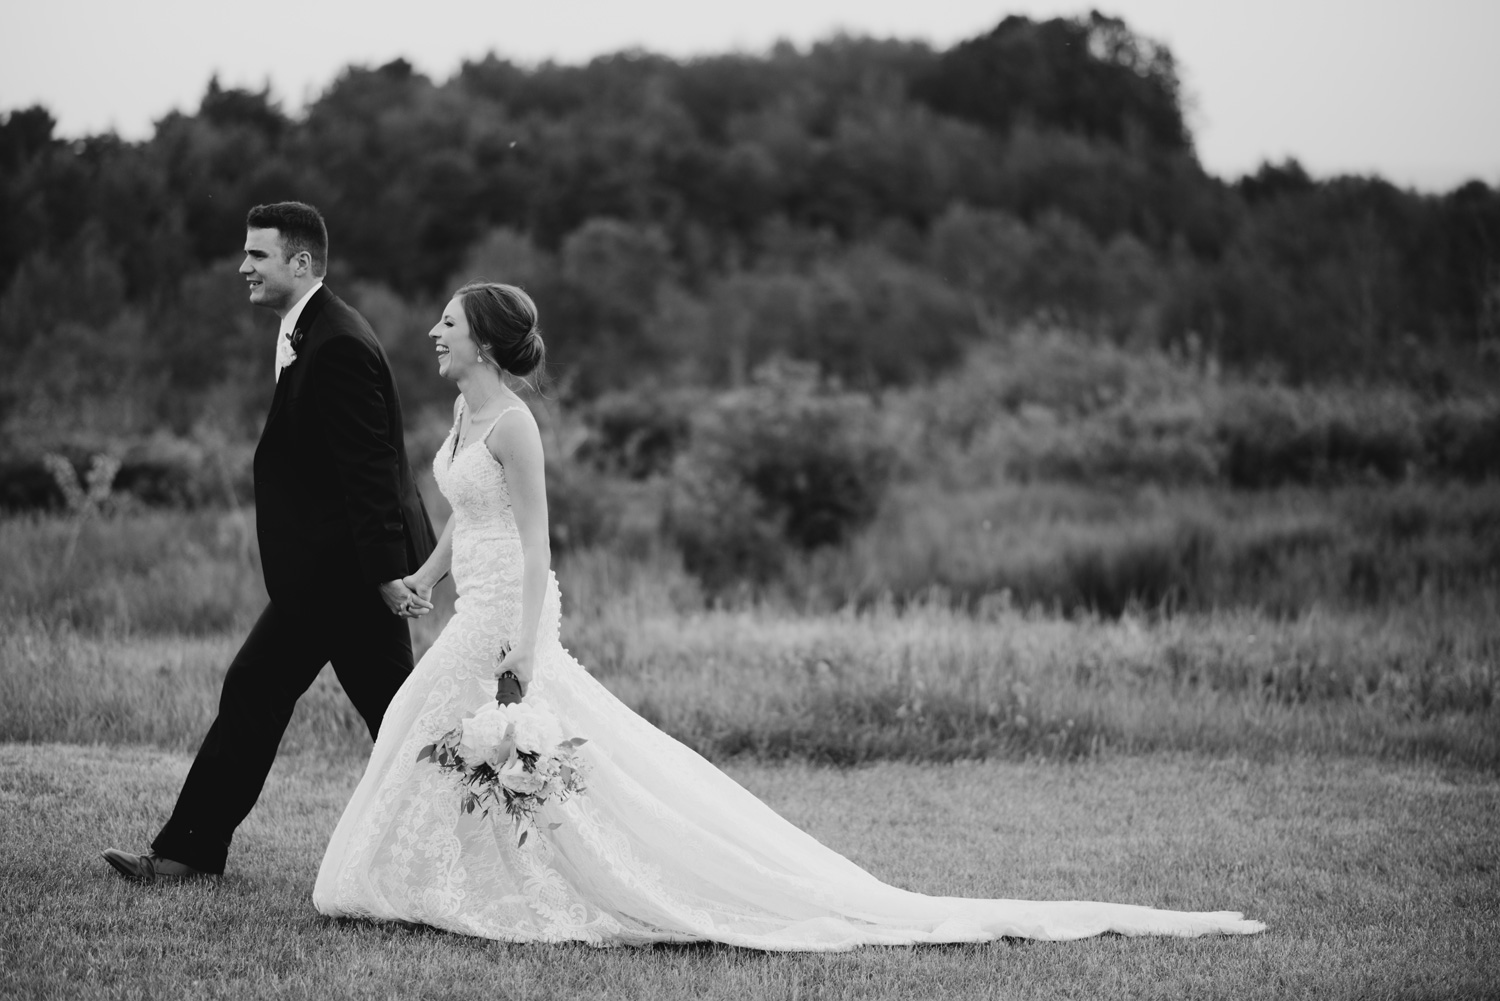 Bride and Groom walking together in a field